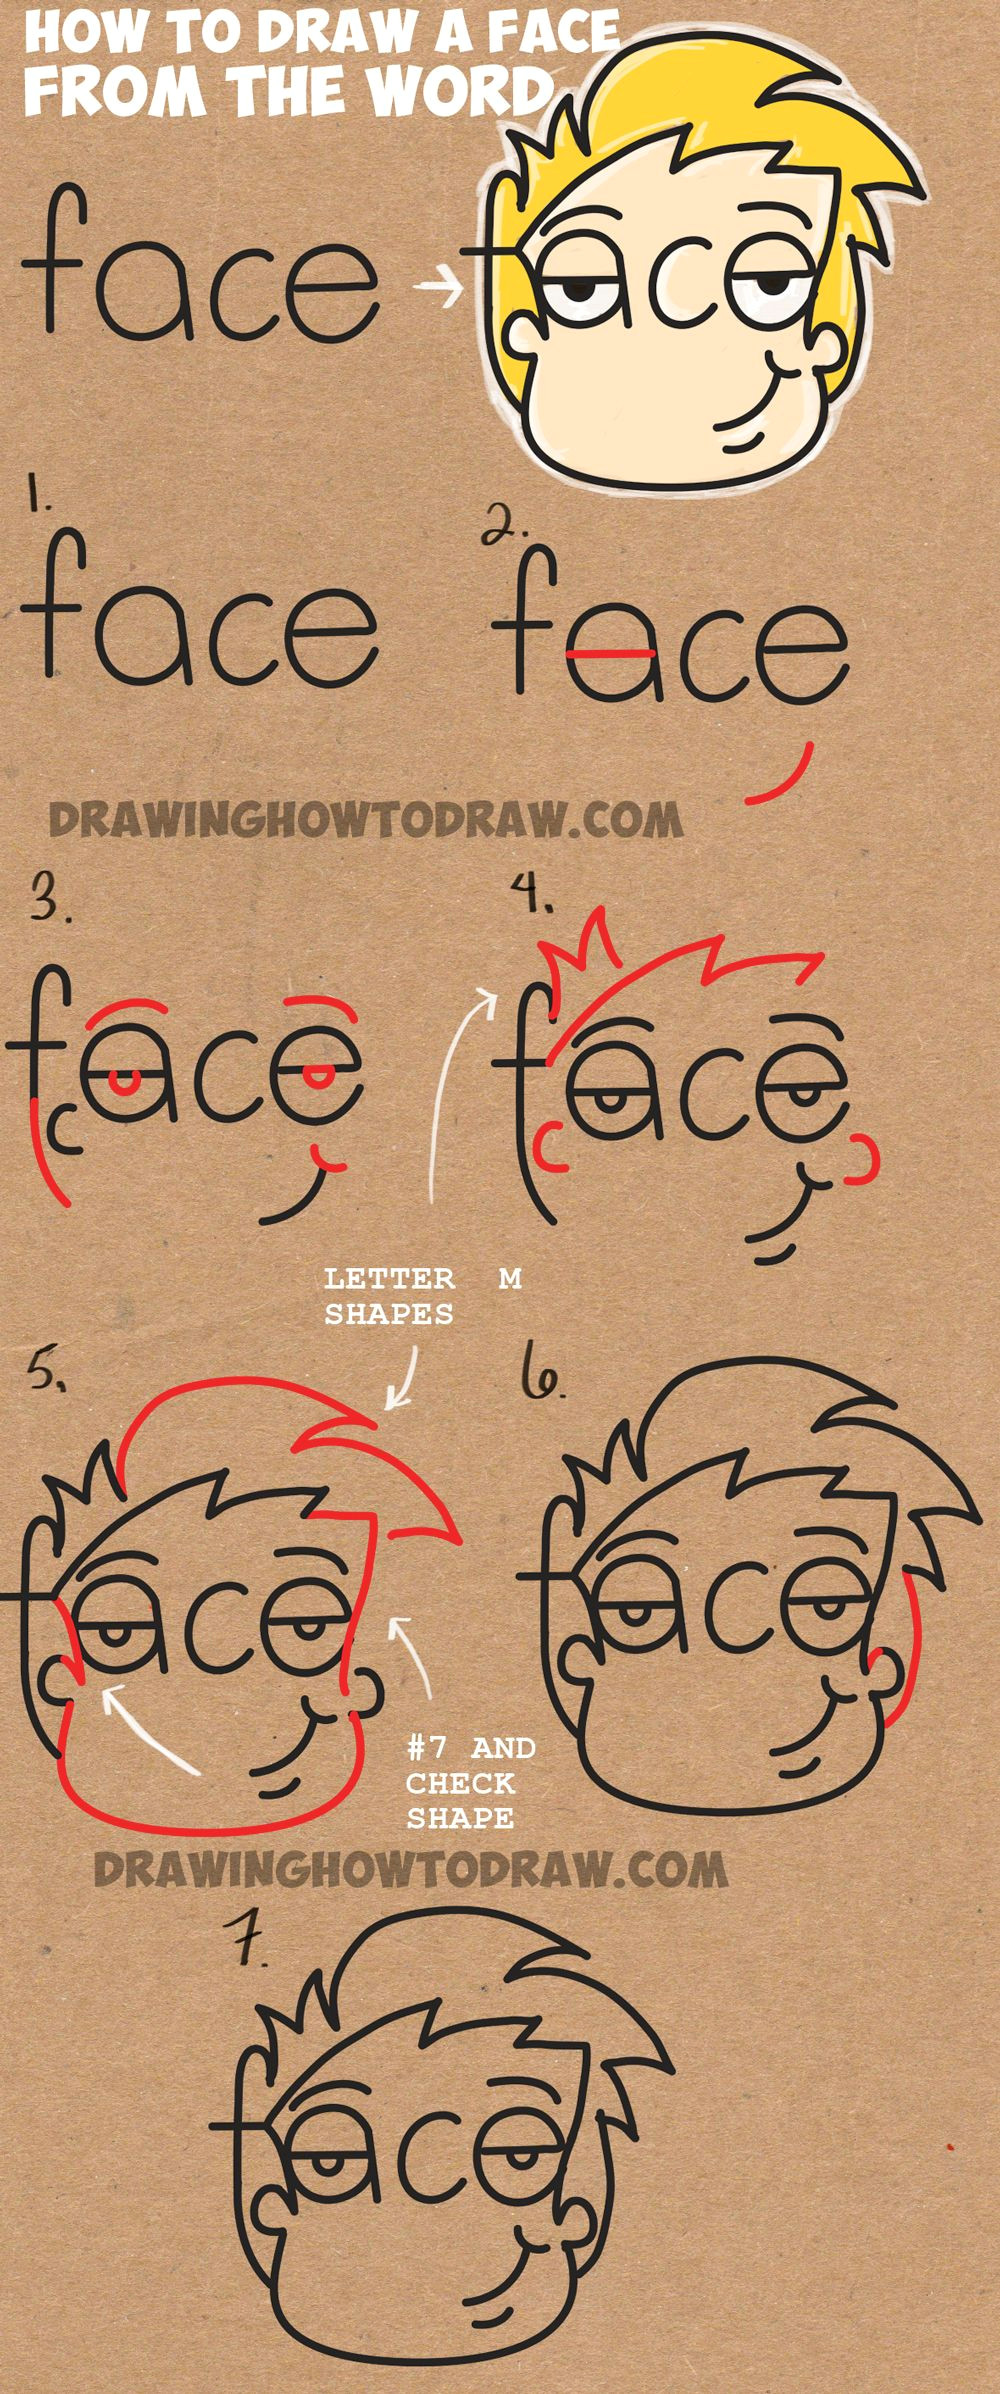 Drawing Ideas Words How to Draw Cartoon Faces From the Word Face Easy Step by Step